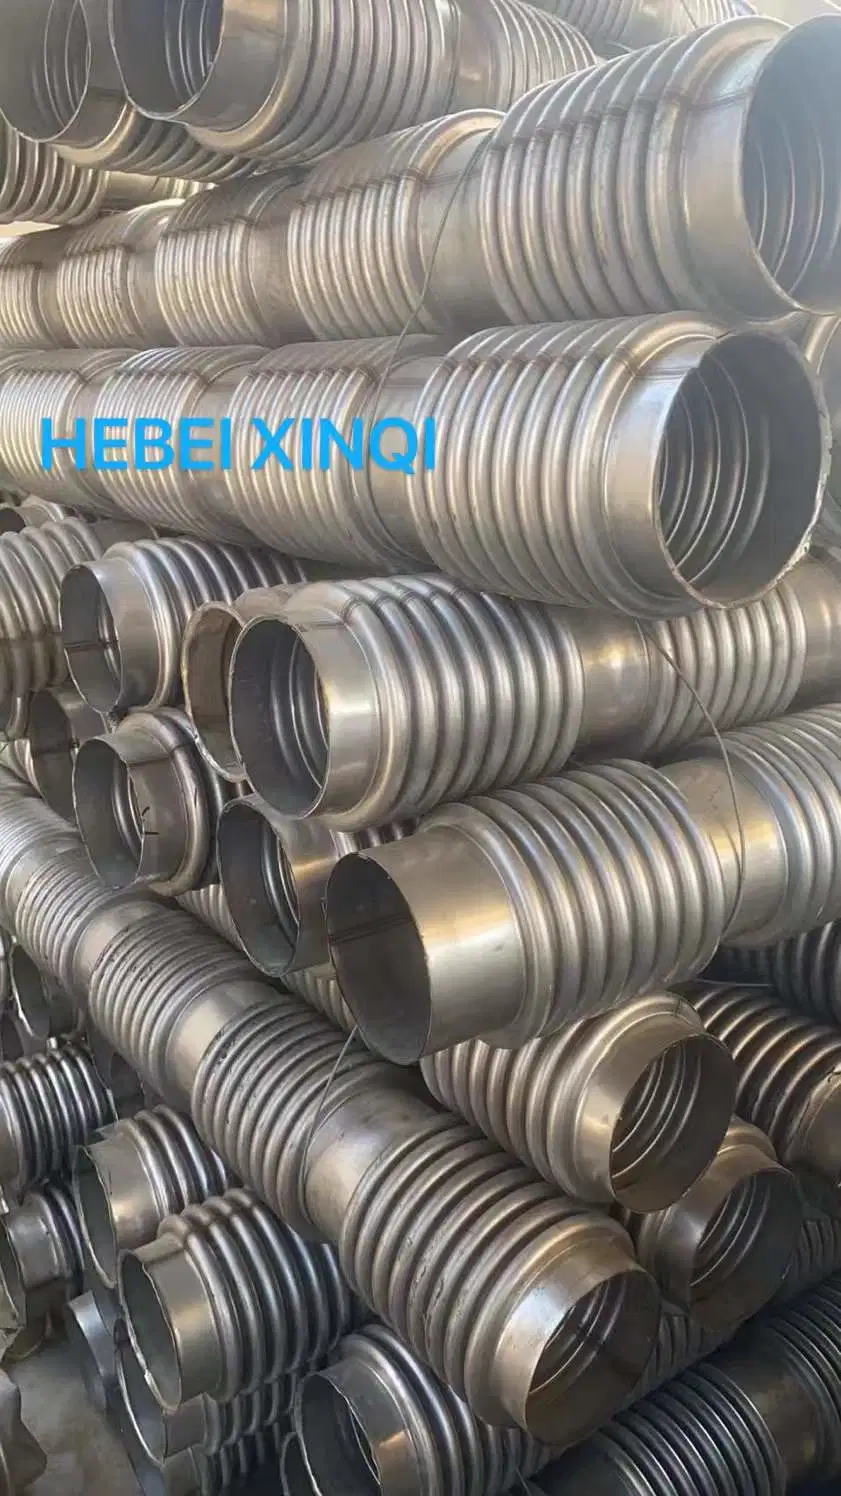 SS304 SS316L Ss904L Ub6 Stainless Steel Bellows Used for Making Metal Expansion Joints